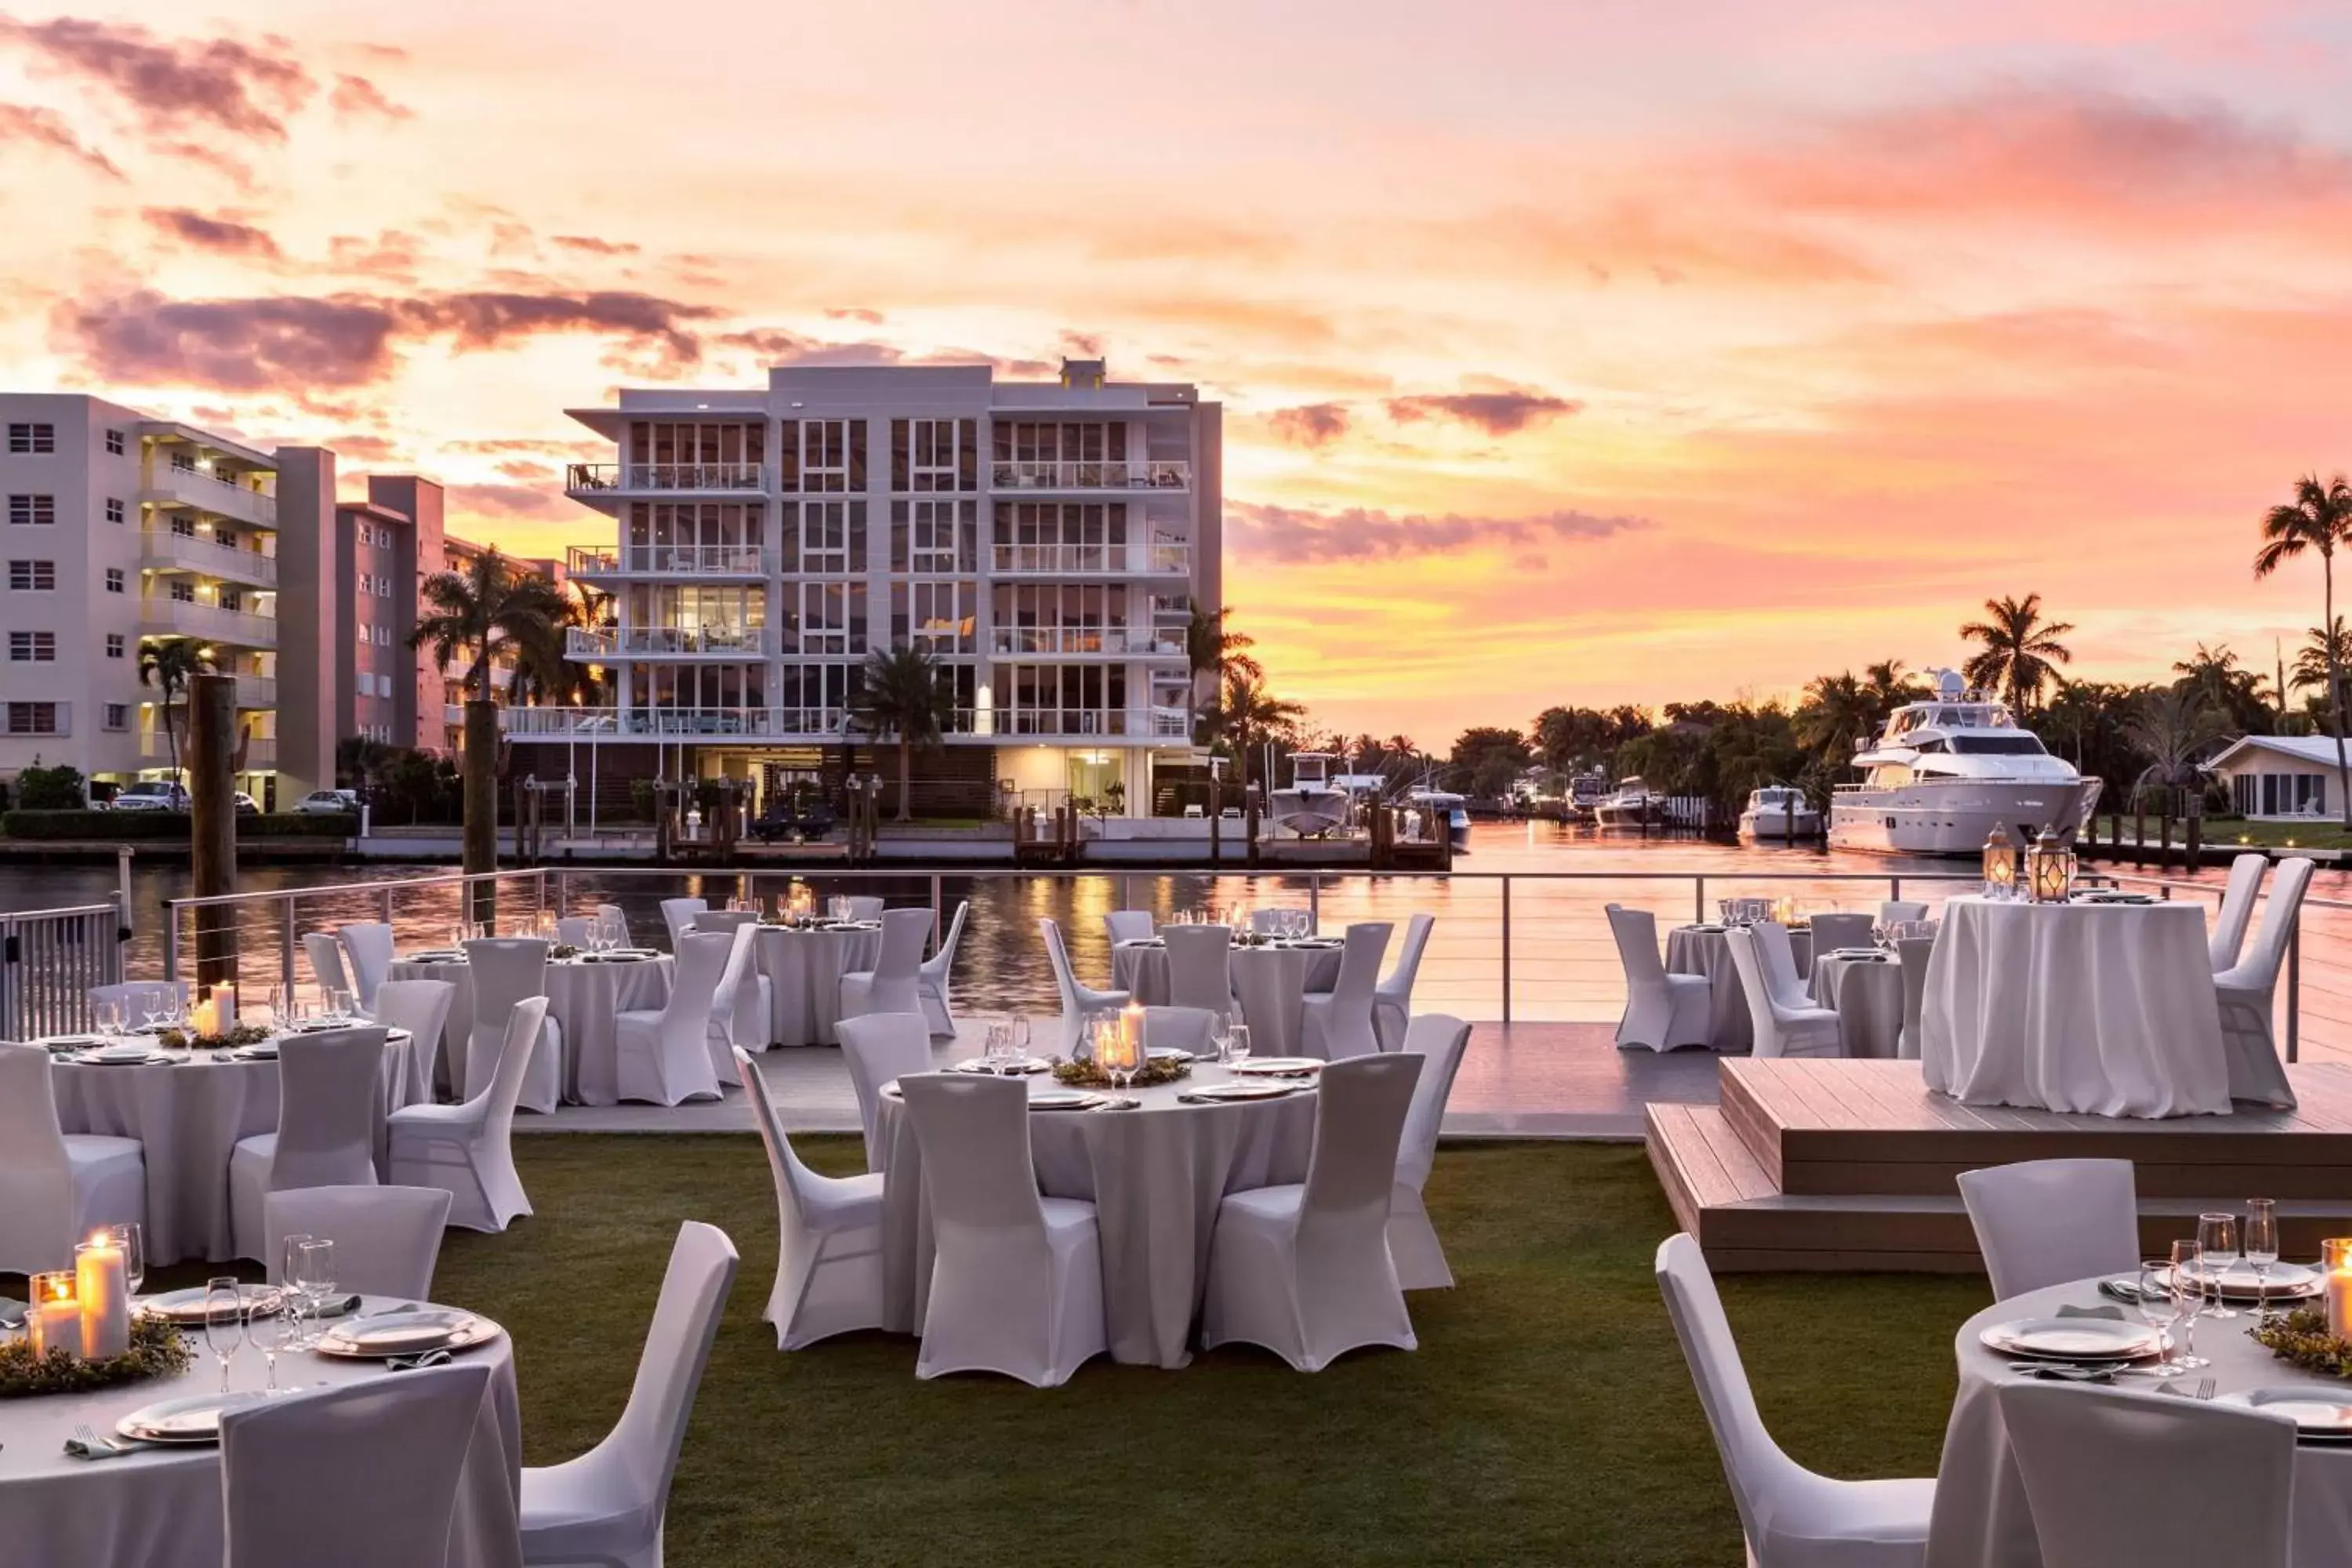 Swimming pool, Banquet Facilities in Residence Inn by Marriott Fort Lauderdale Intracoastal